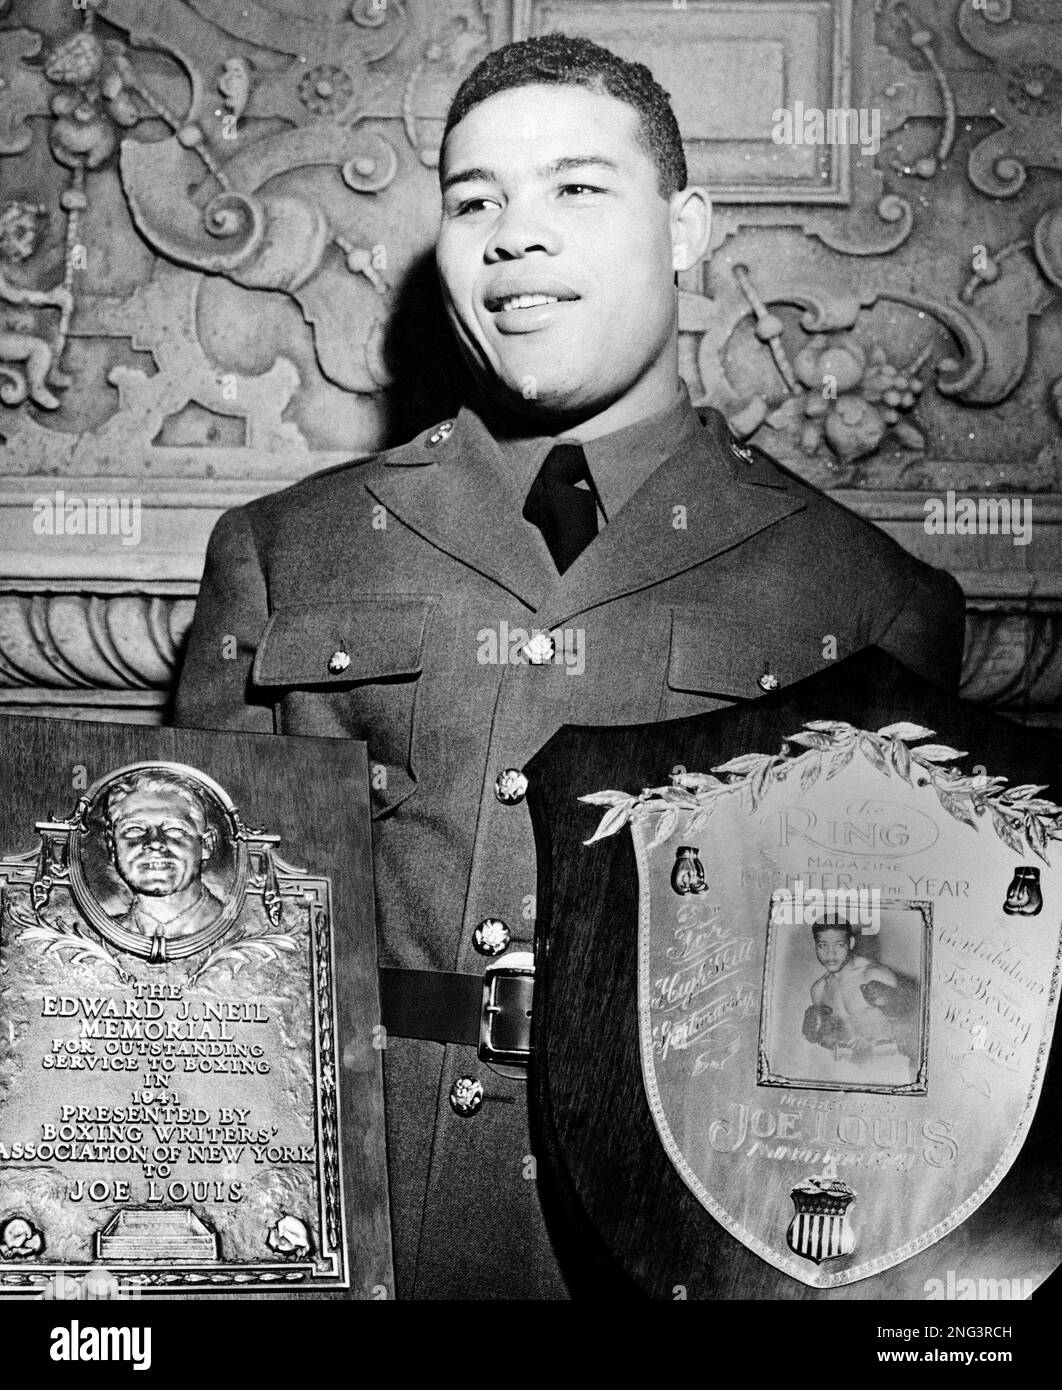 Private Joe Louis heavyweight champion proudly holds the Edward J.Neil  award presented to him by the Boxing Writers Association in New York on  January 22, 1942. Louis also received the Ring Magazine